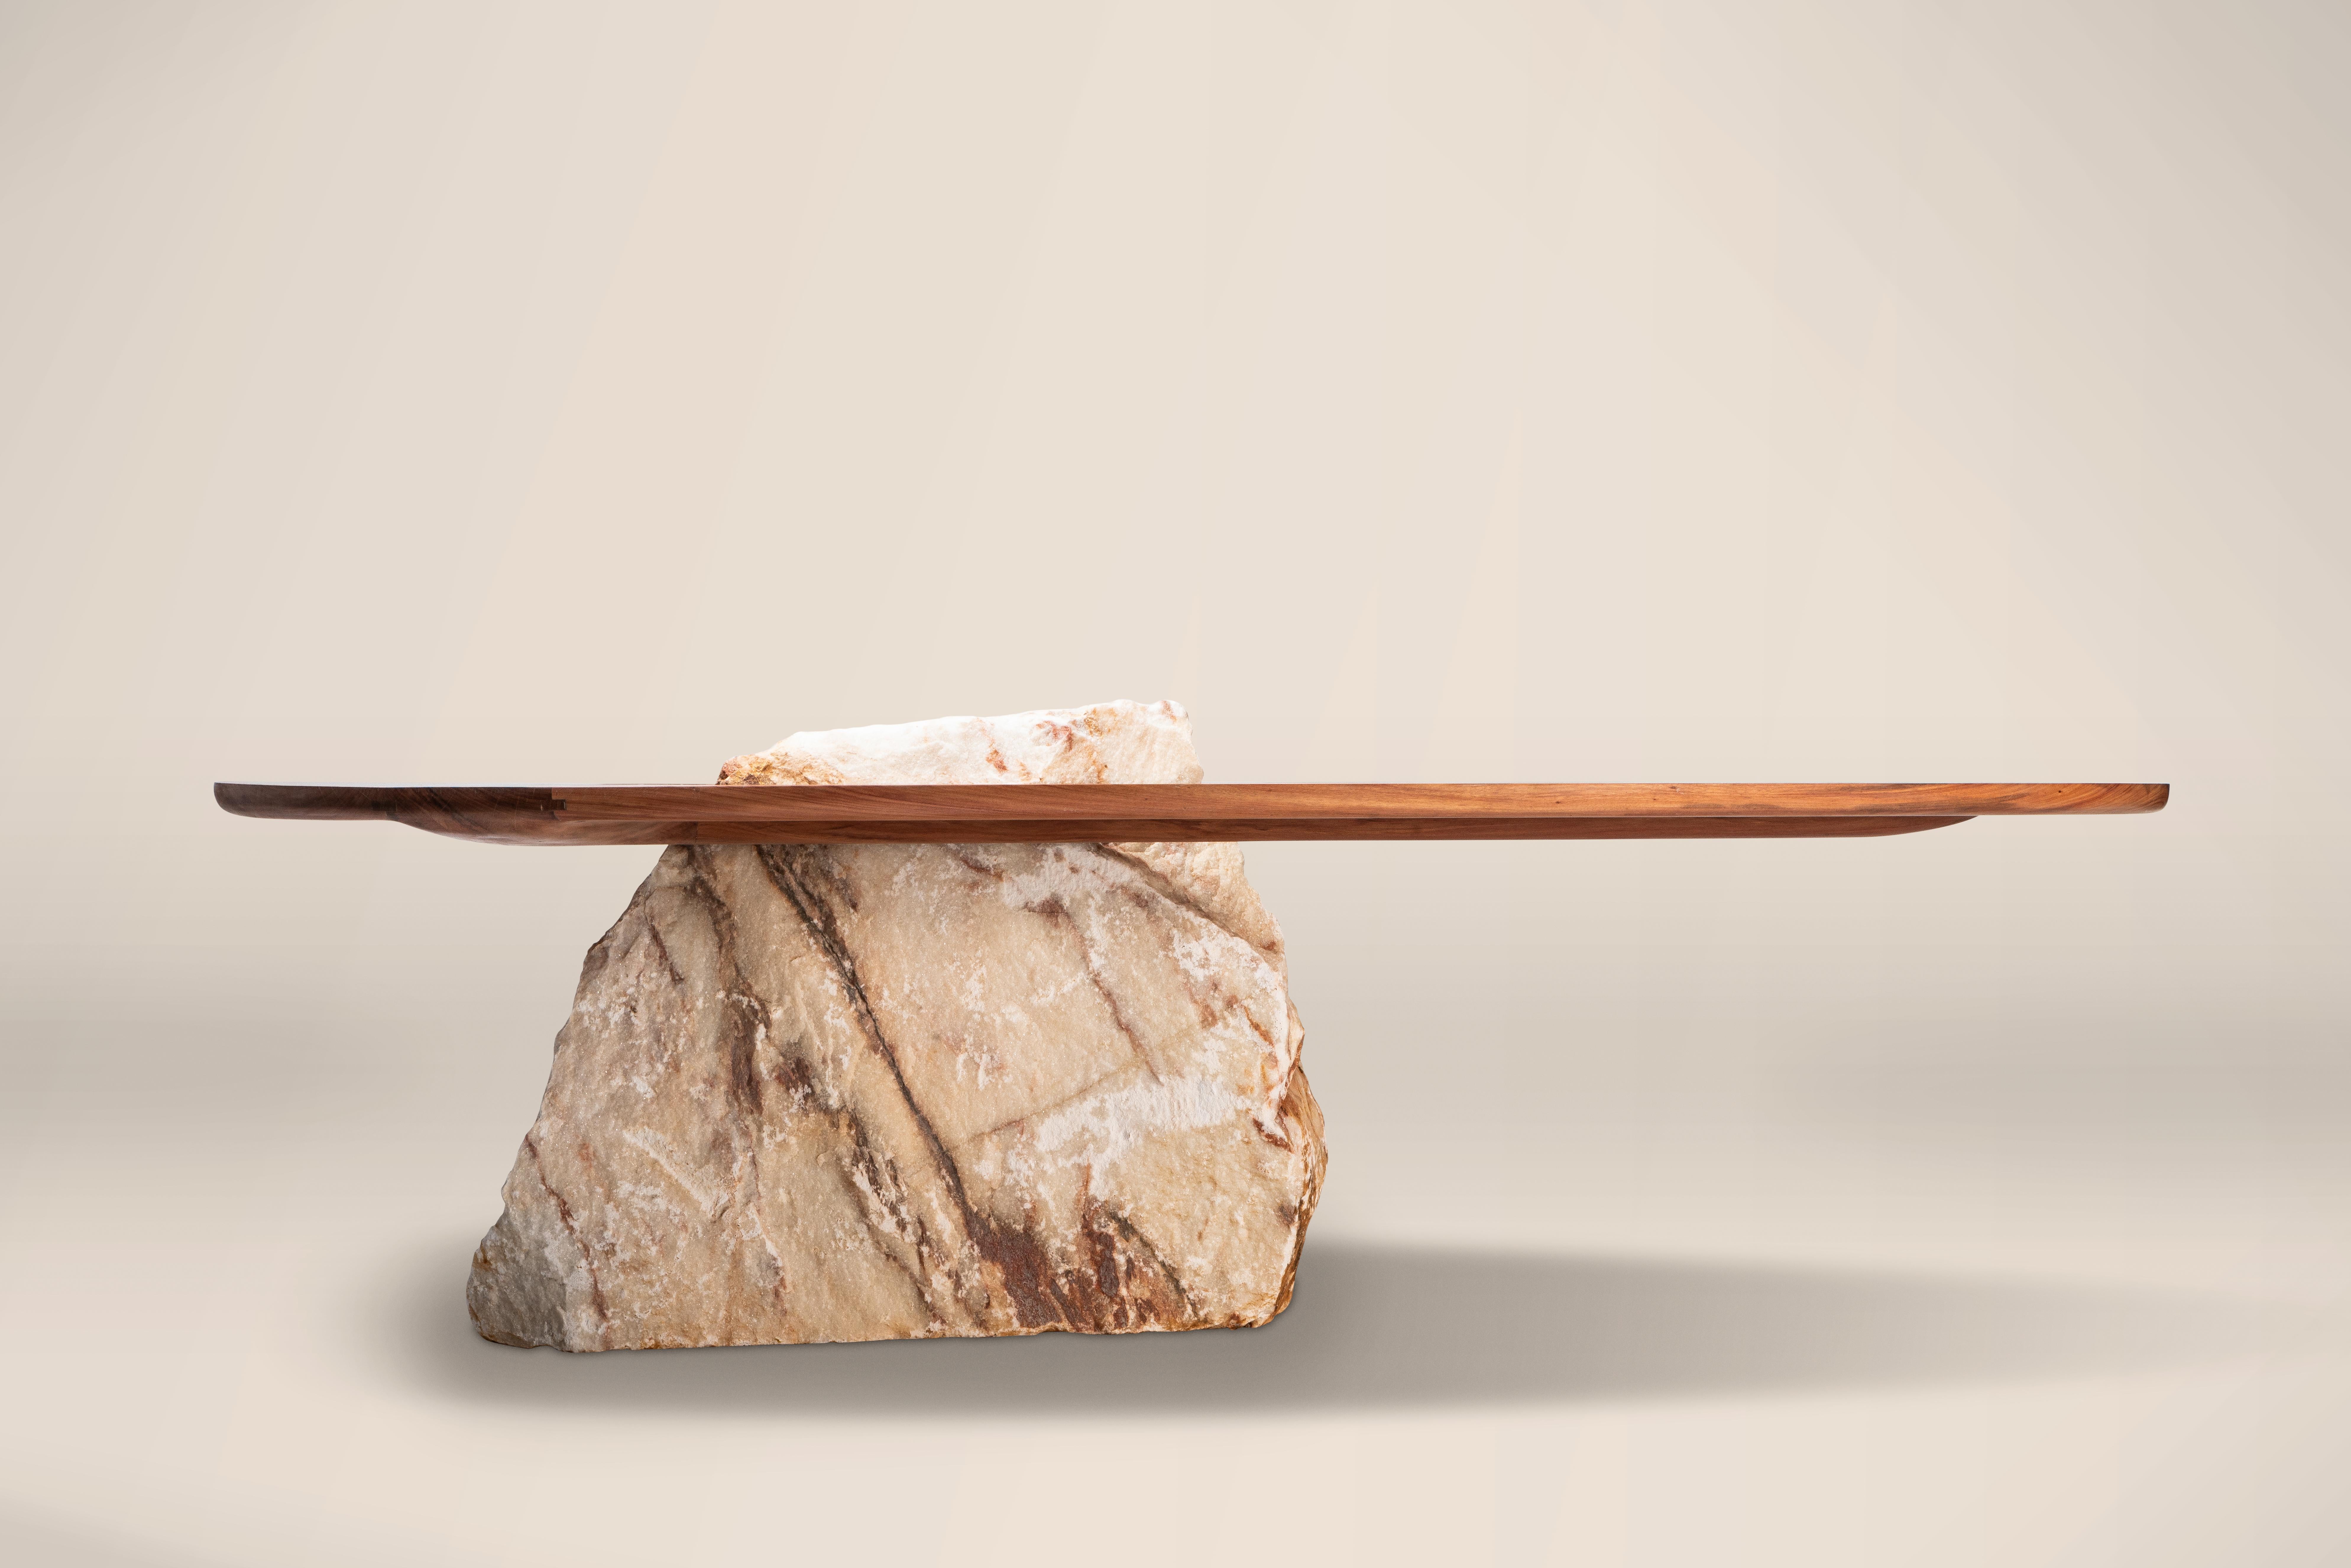 Mircea Anghel’s Pico Table Series is an ode to the volcanic island with the same name, located in the middle of the Atlantic Ocean. Pico Rosa Table is built with only two parts: one highly controlled, treated, hand shaped piece of wood; the other a